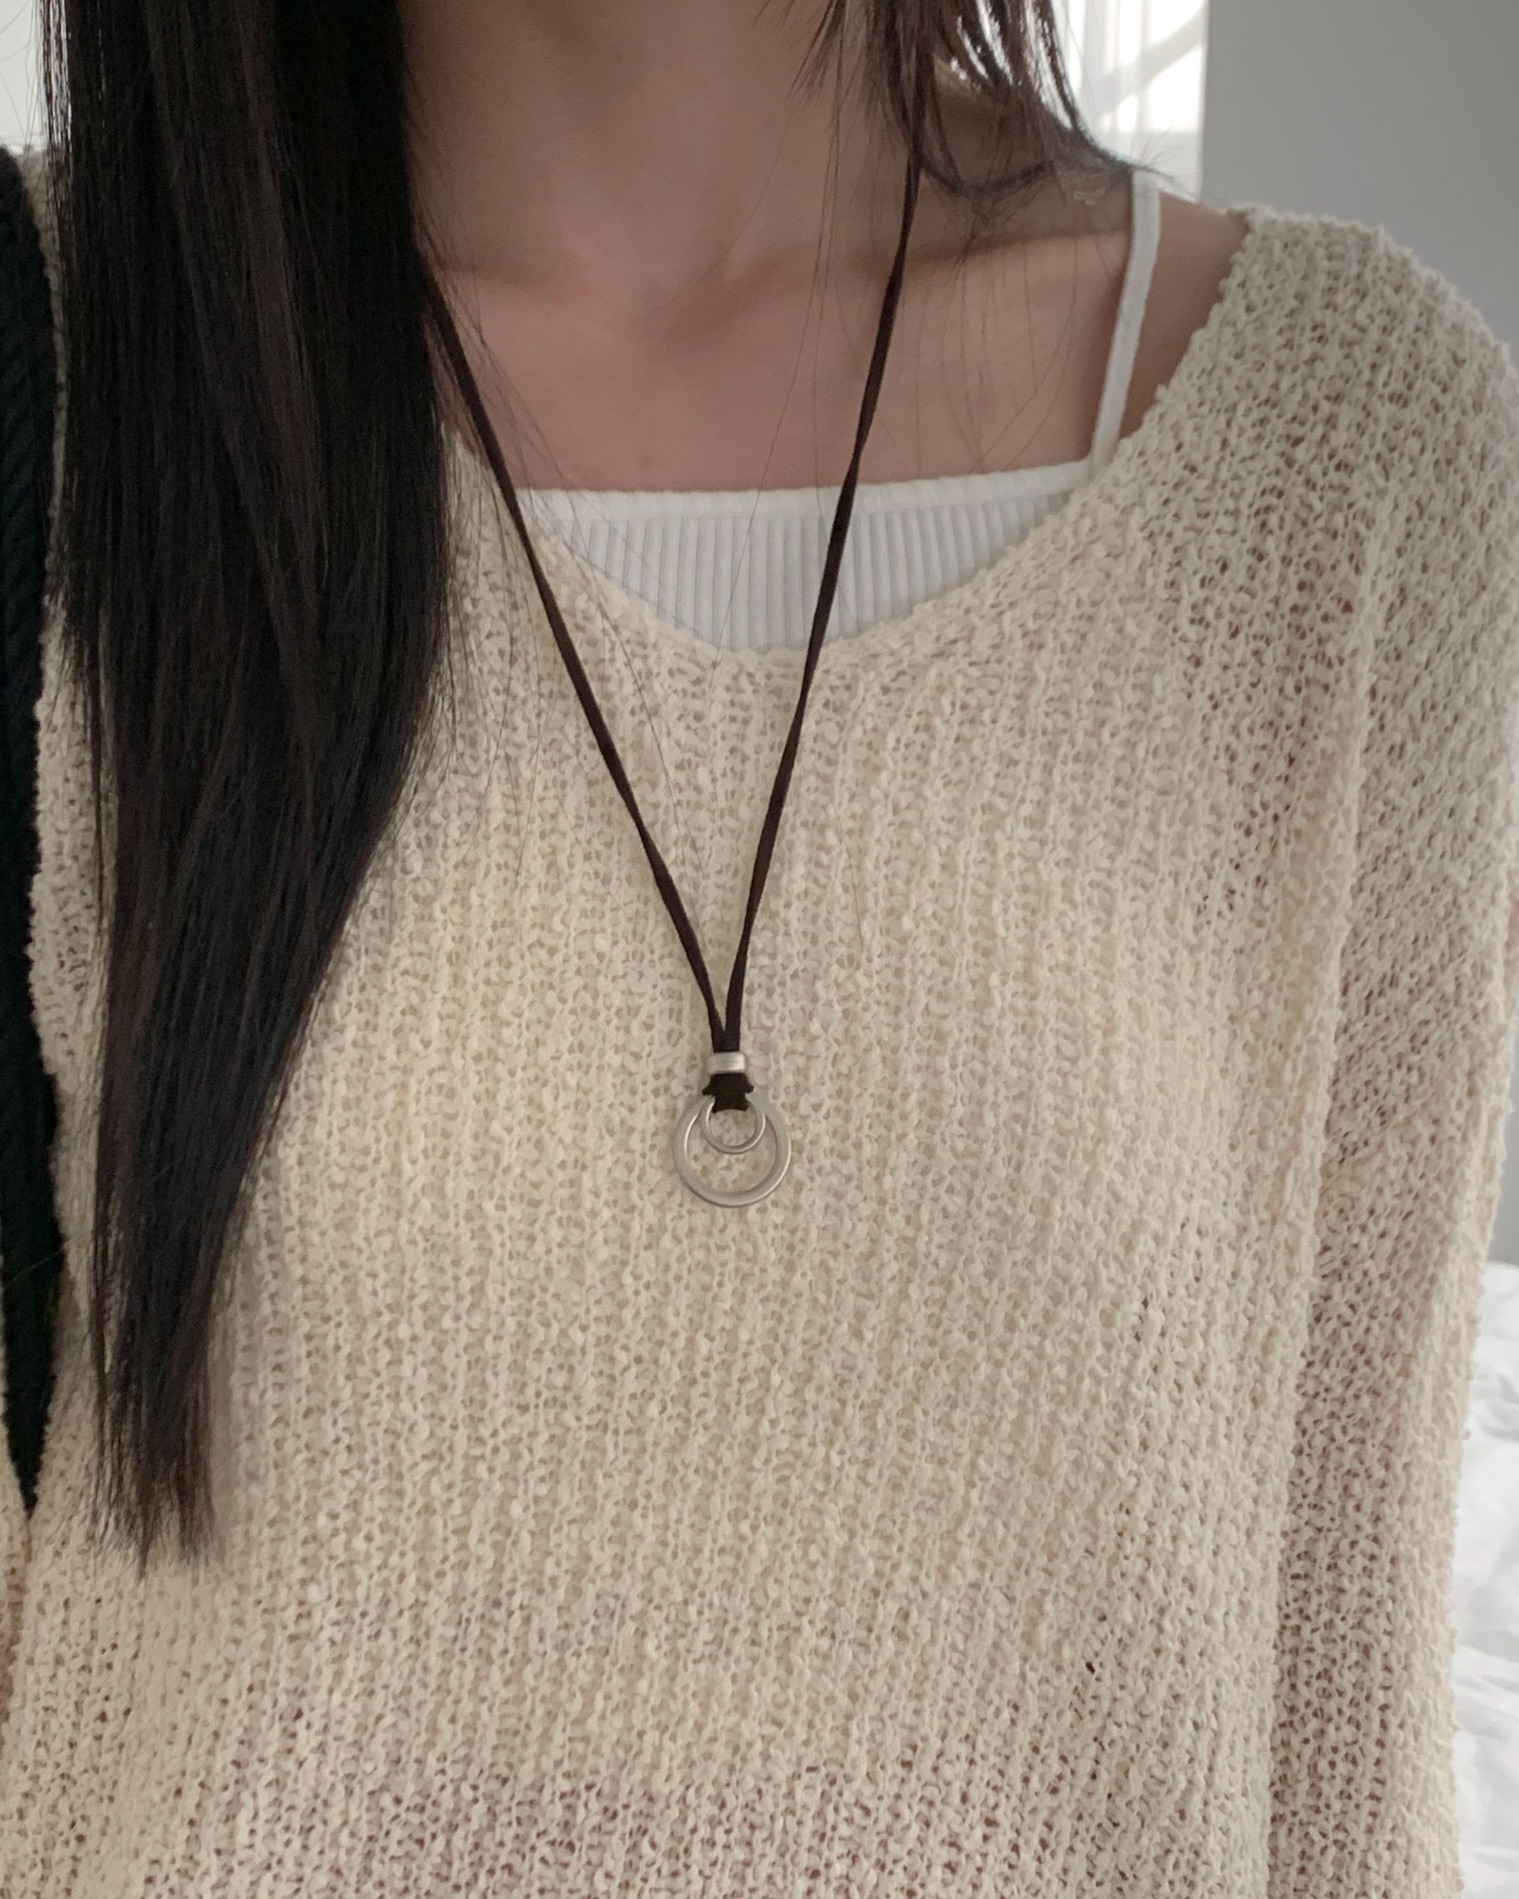 Double ring necklace